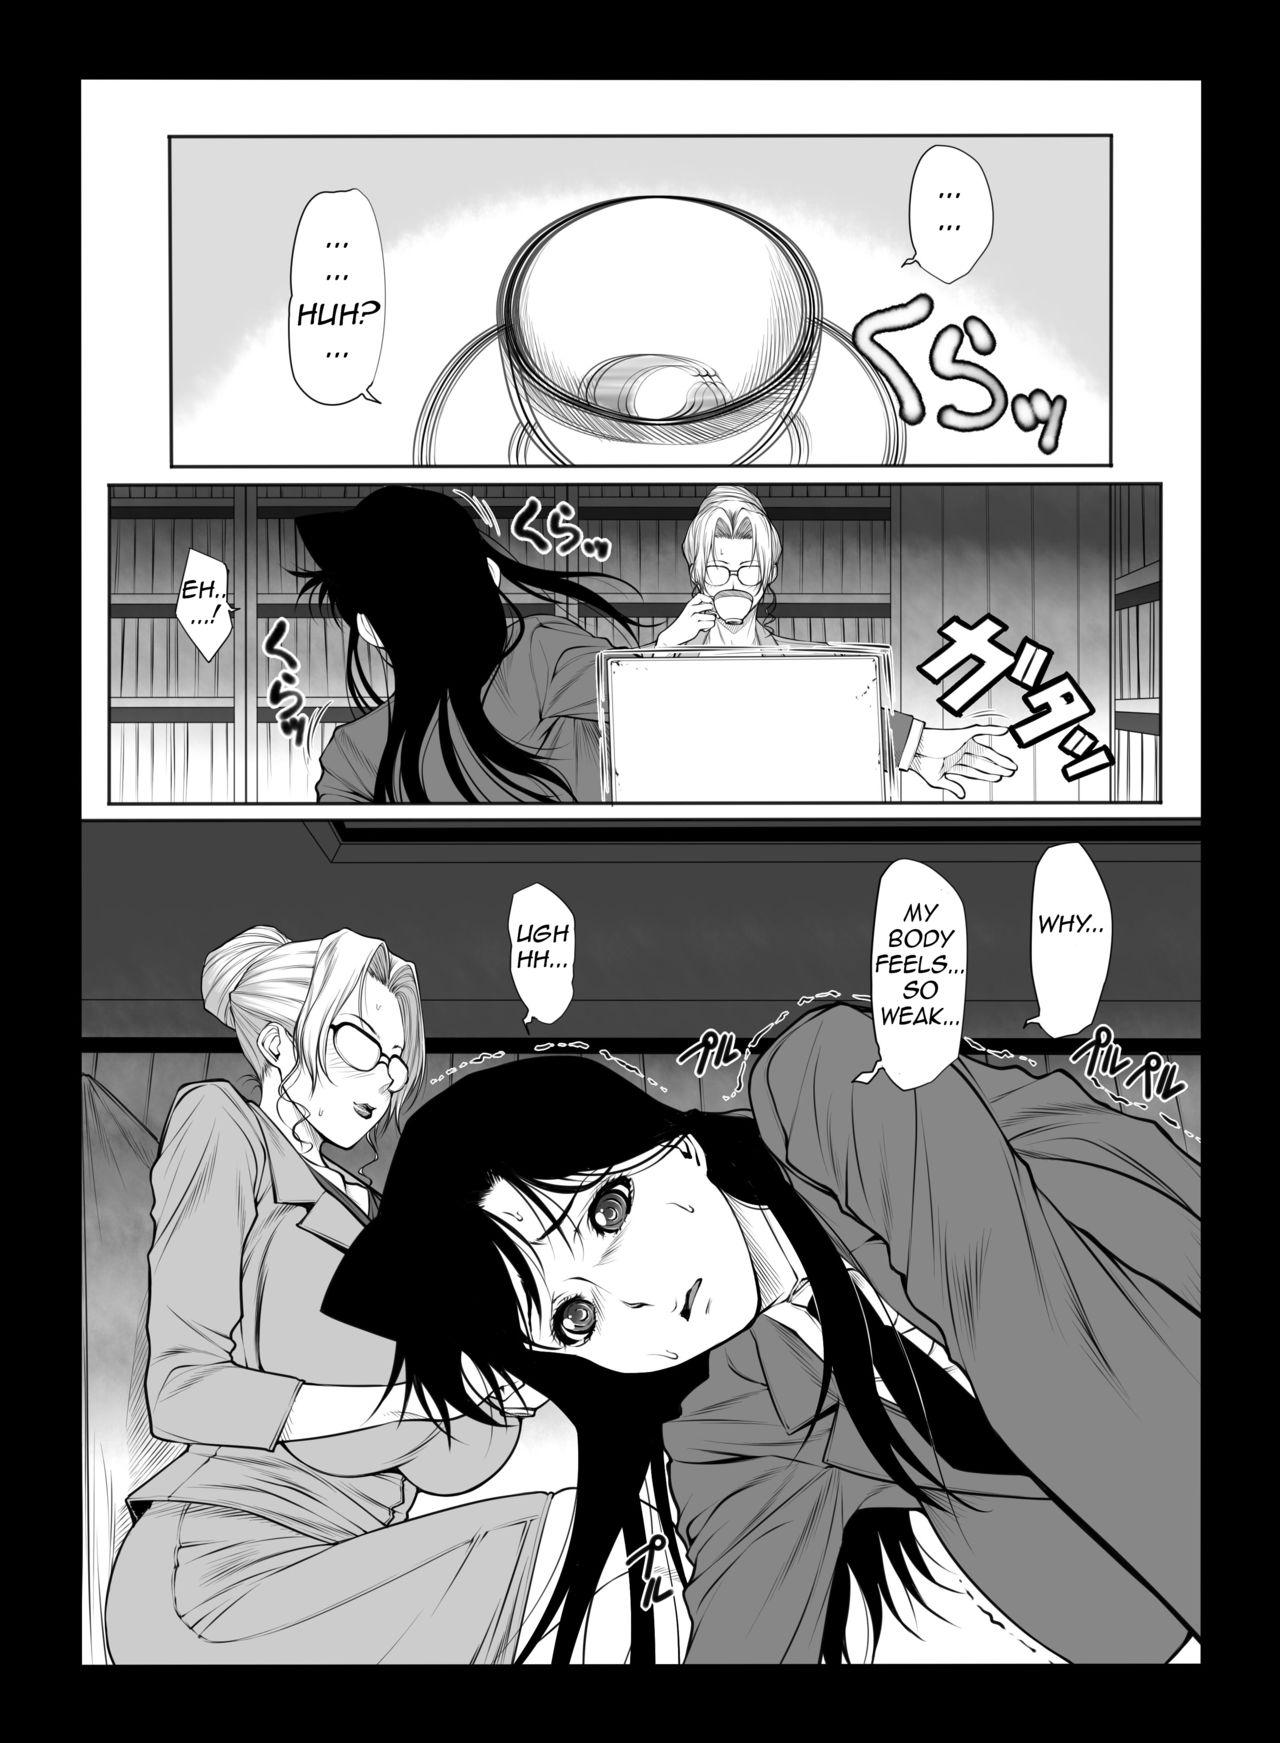 The Incestuous Daily Life of Ms. Kisaki 2